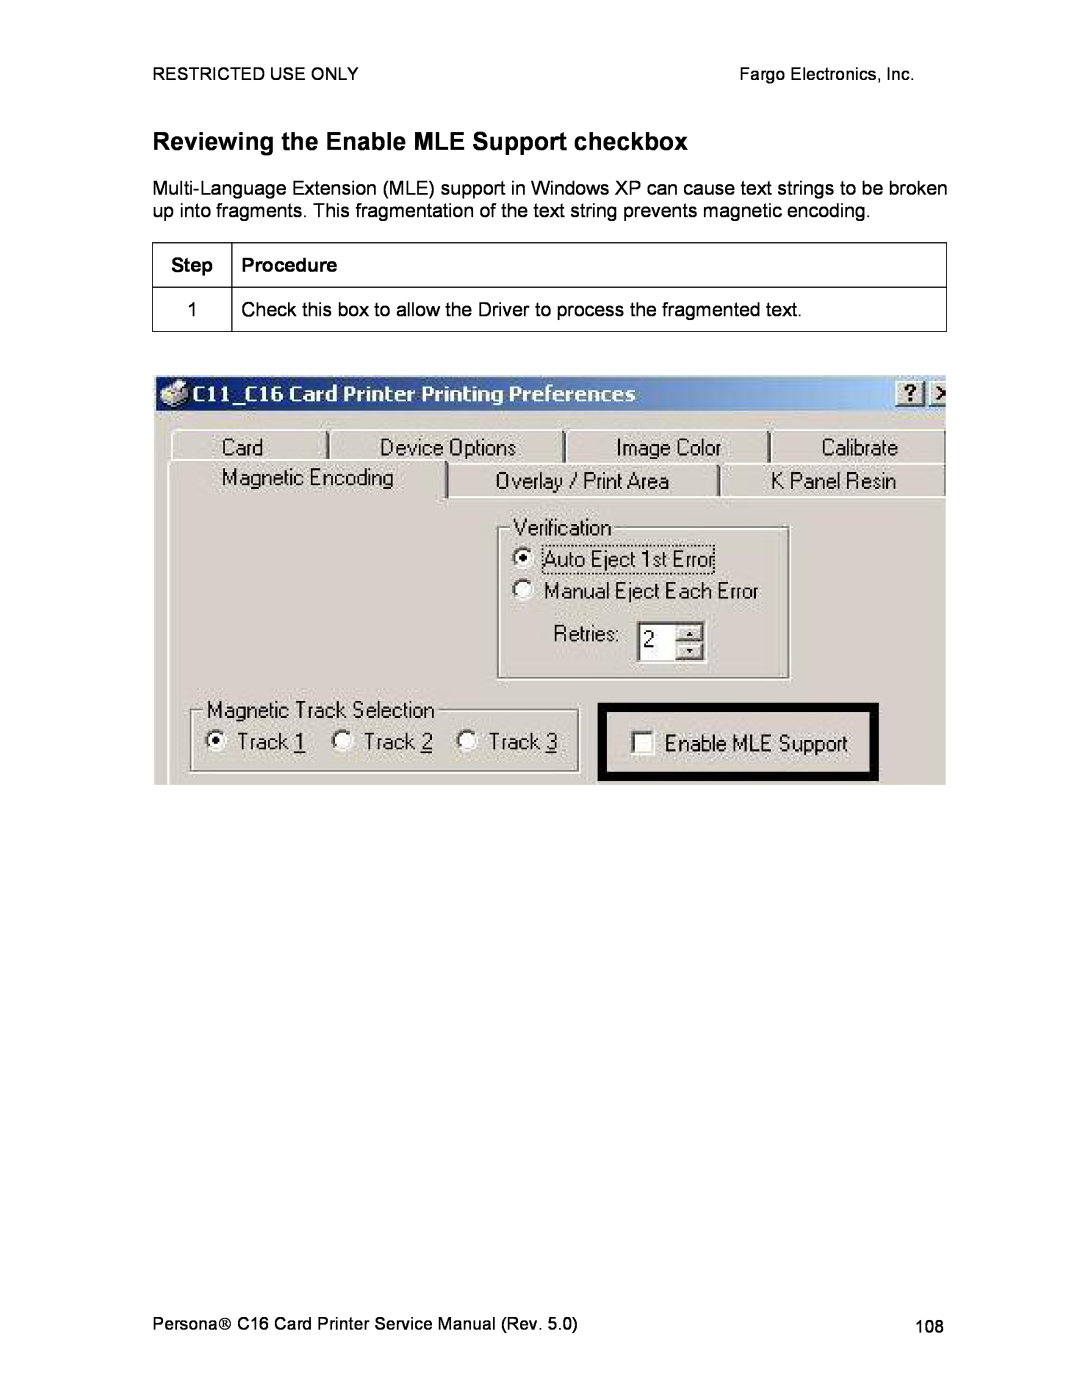 FARGO electronic C16 service manual Reviewing the Enable MLE Support checkbox 